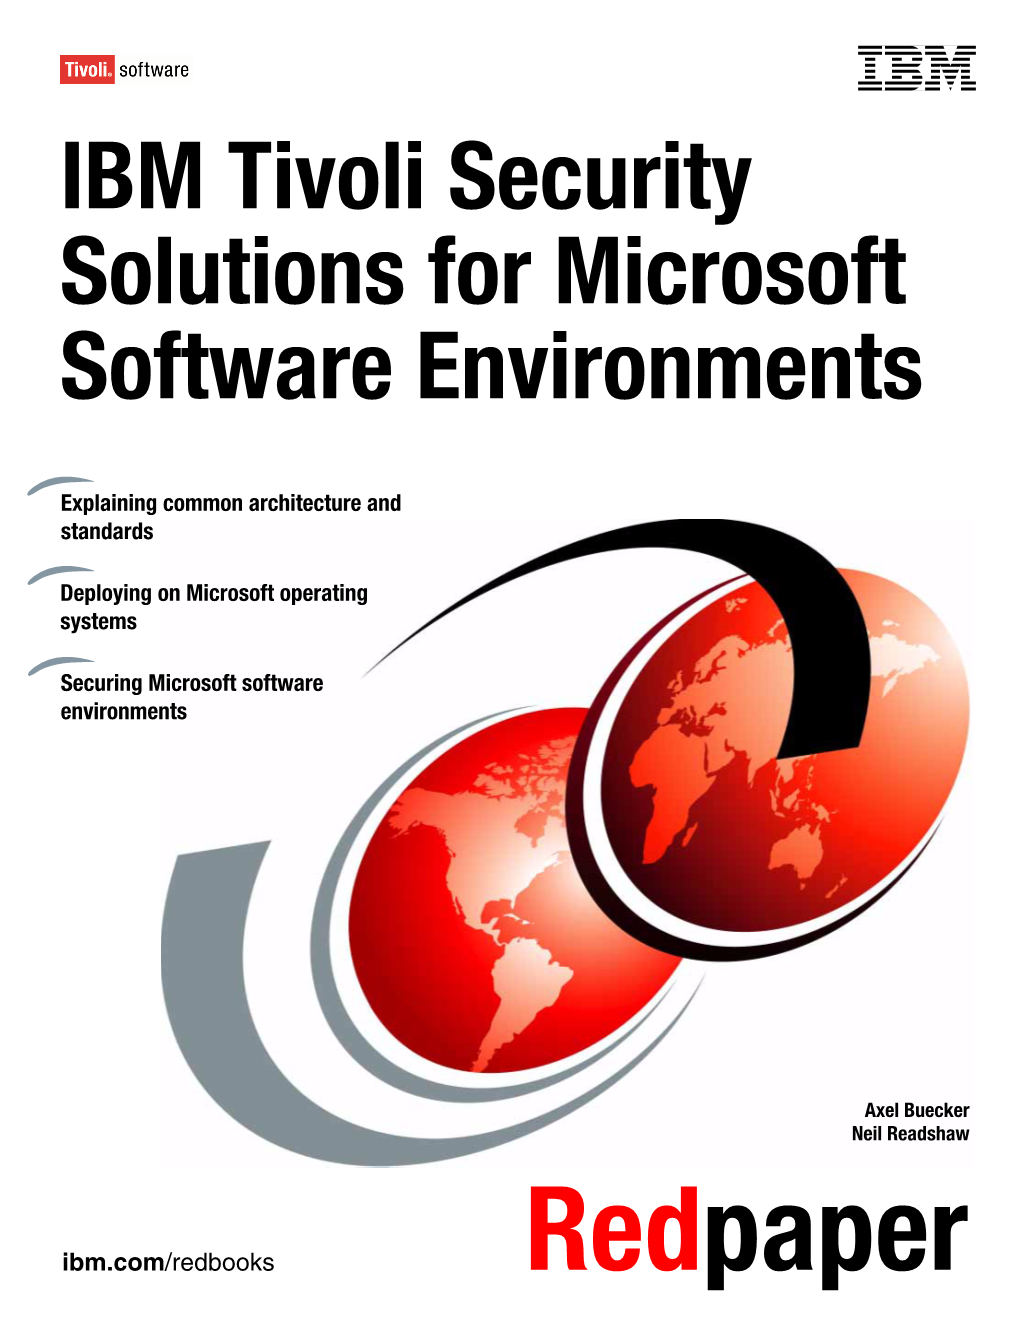 IBM Tivoli Security Solutions for Microsoft Software Environments